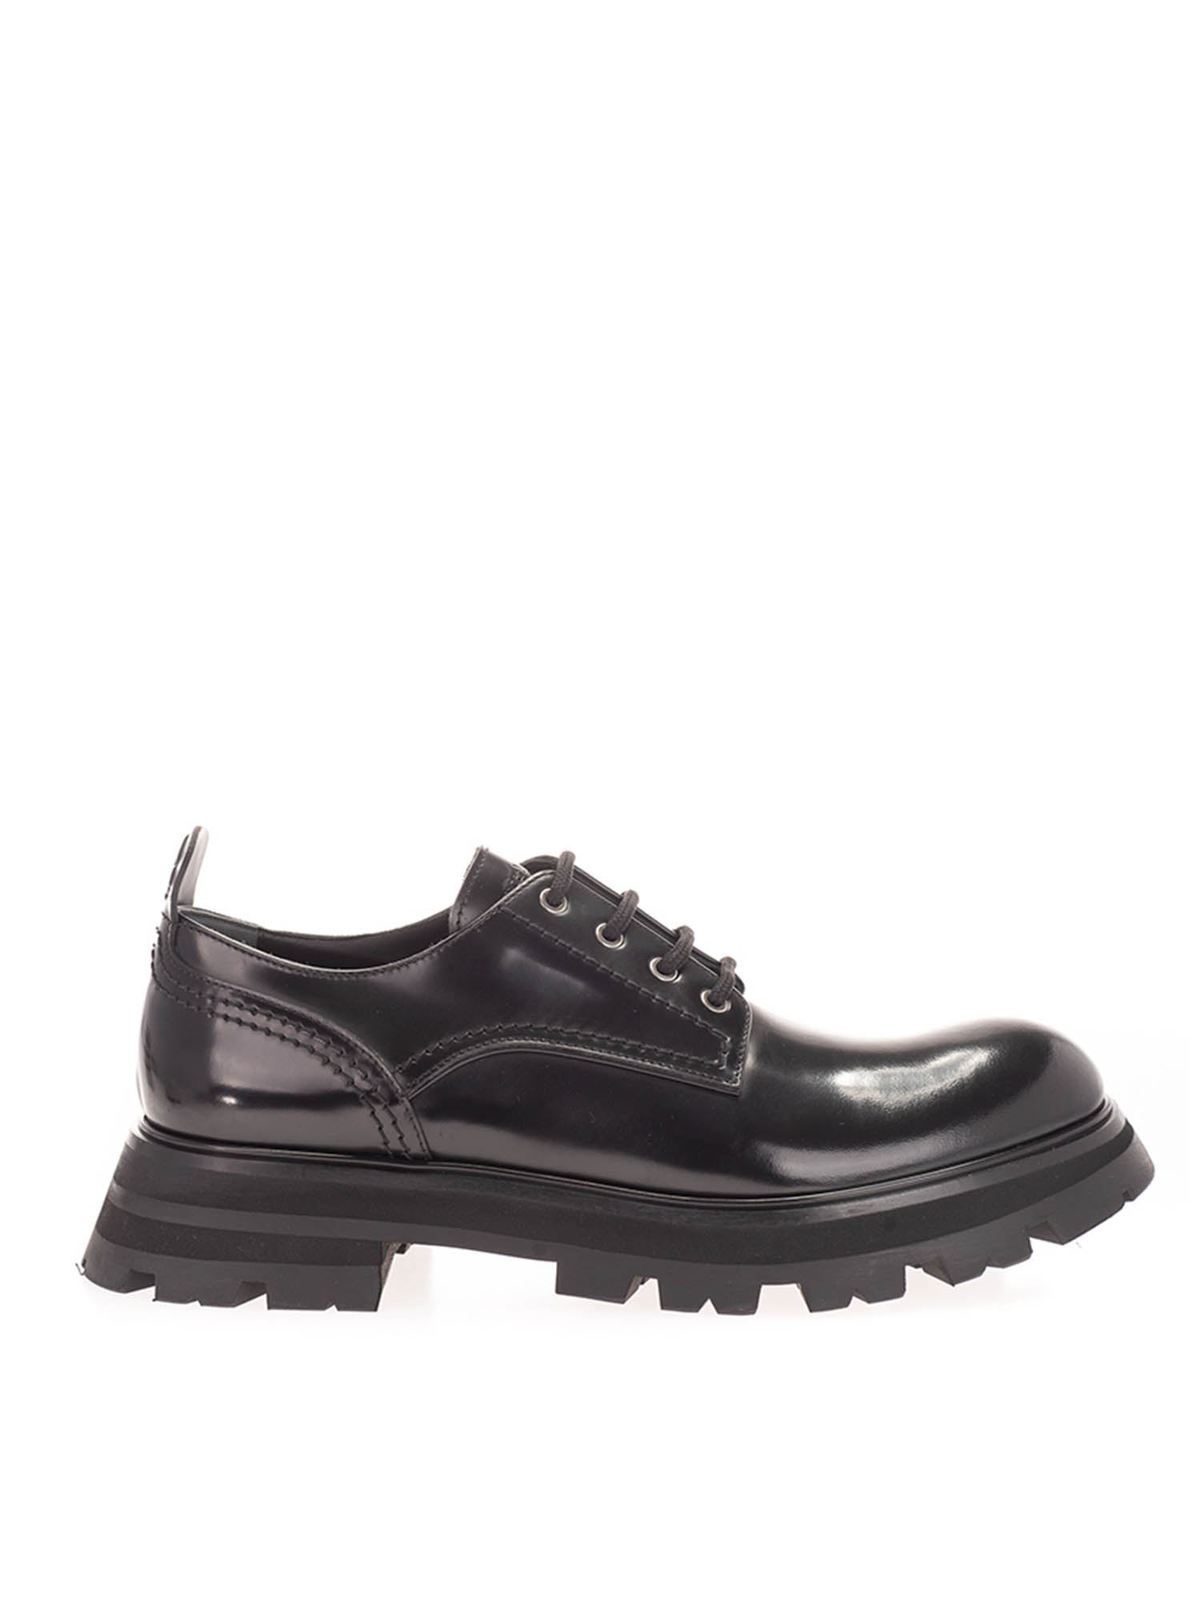 Lace-ups shoes Alexander Mcqueen - Wander derby shoes in black ...